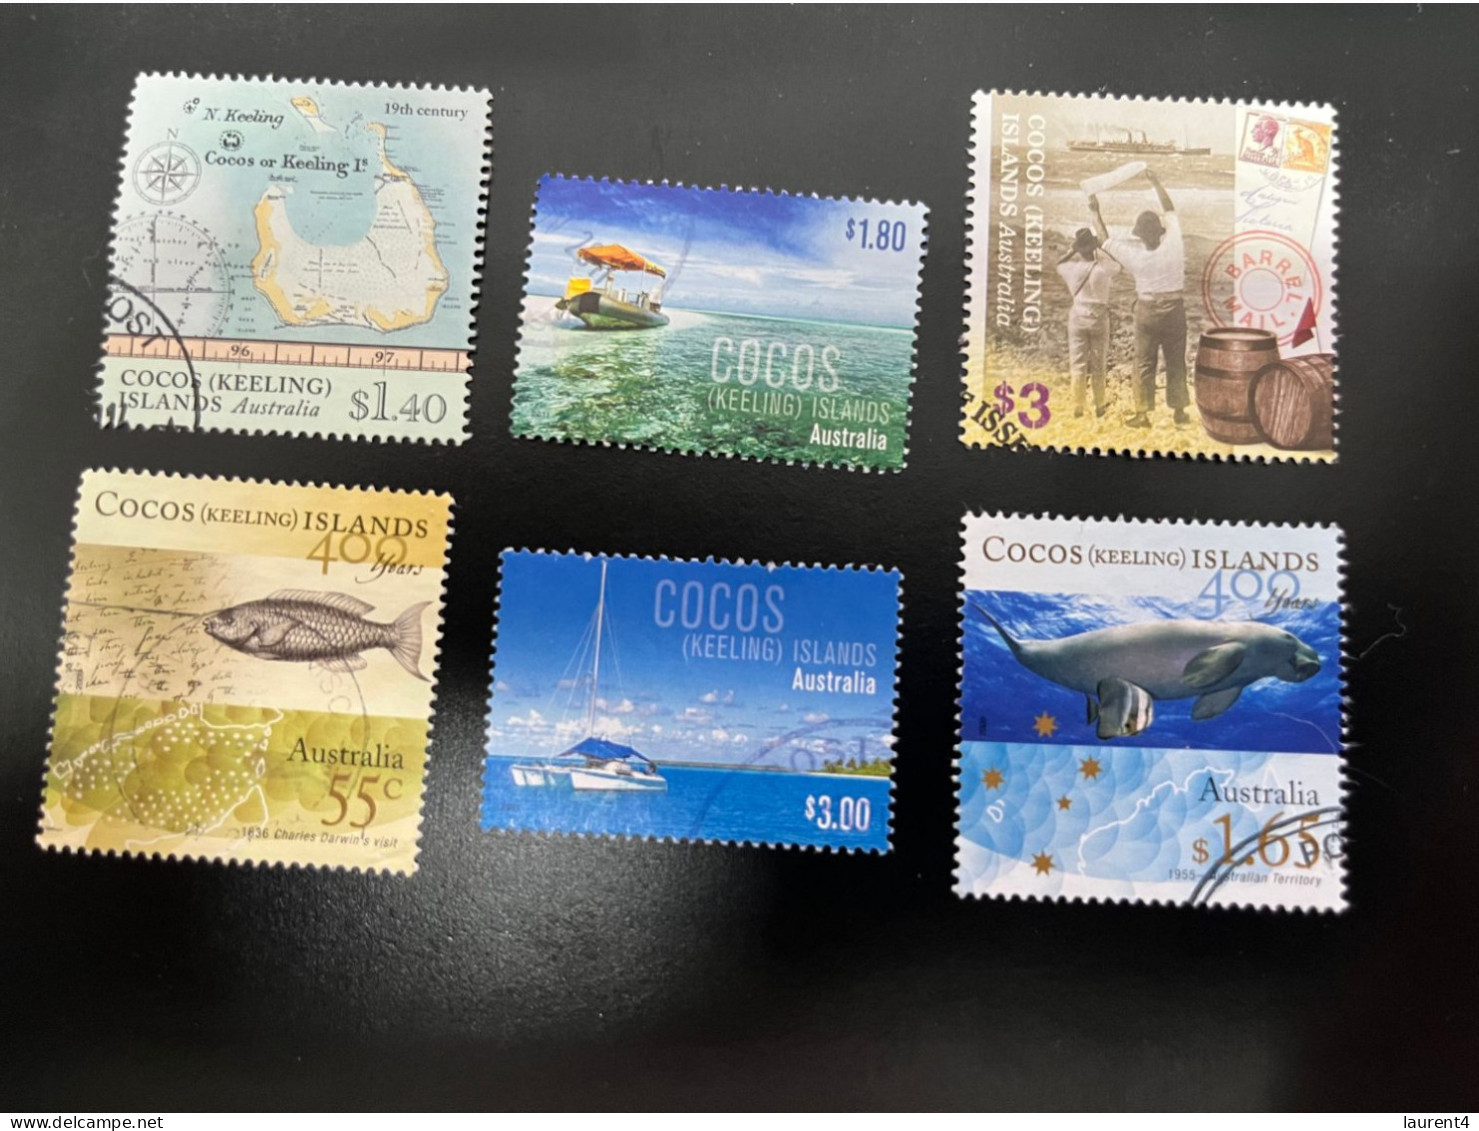 21-10-2023 (stamps) Selection Of Cocos (Keeling) Island Stamps (Australia) - 6 Stamps - Cocos (Keeling) Islands